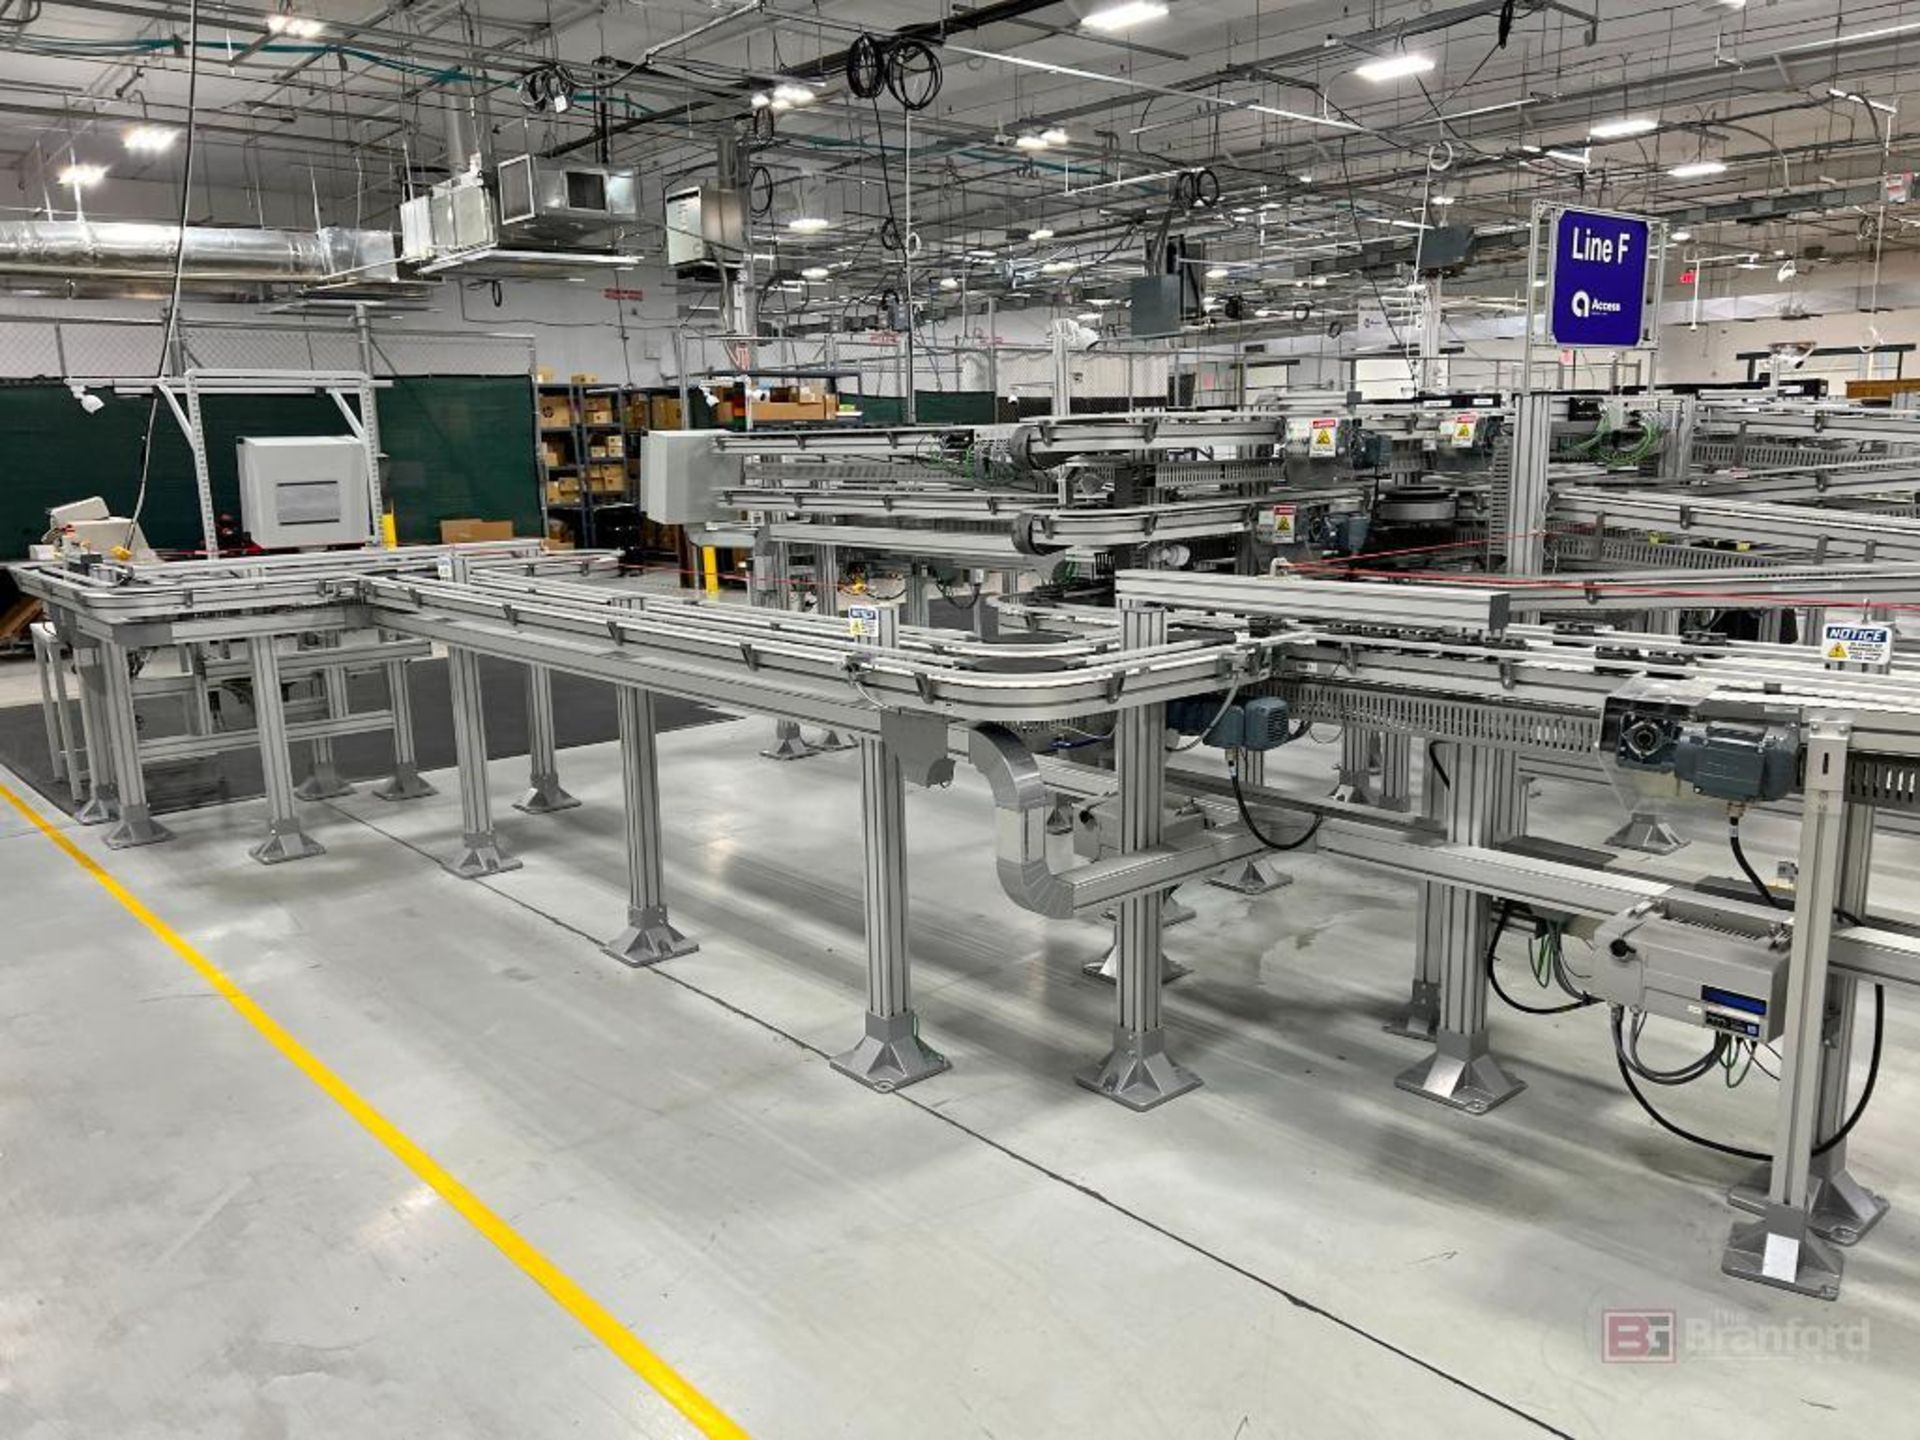 Flexlink Gen2 Multi-Layer Belt Conveyor System with DRO main control - Image 16 of 18